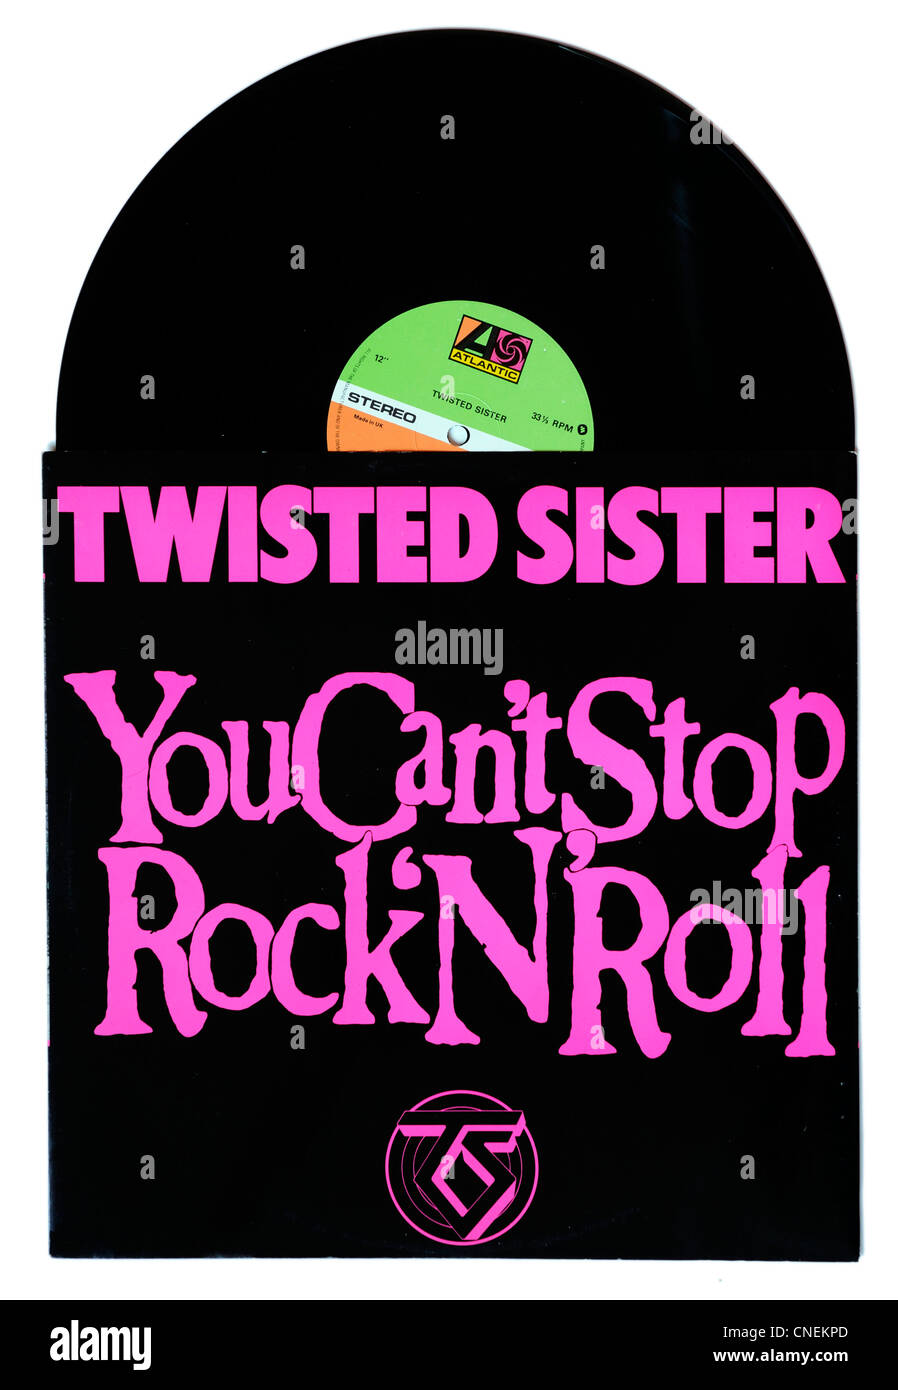 Twisted Sister You Can't Stop Rock 'n' Roll single Stock Photo - Alamy